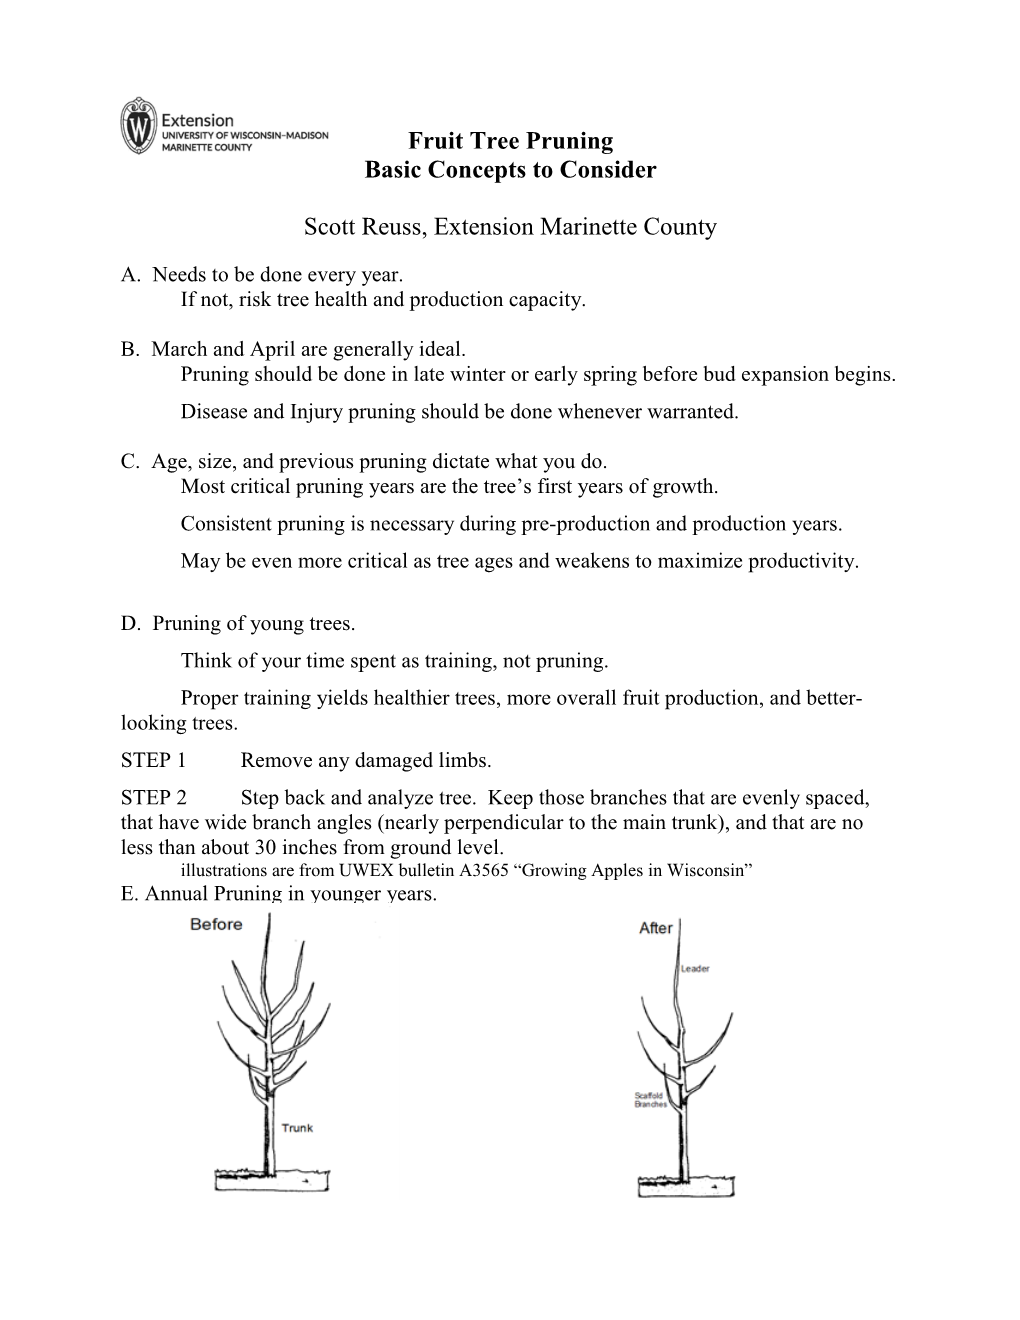 Fruit Tree Pruning Basic Concepts to Consider Scott Reuss, Extension Marinette County